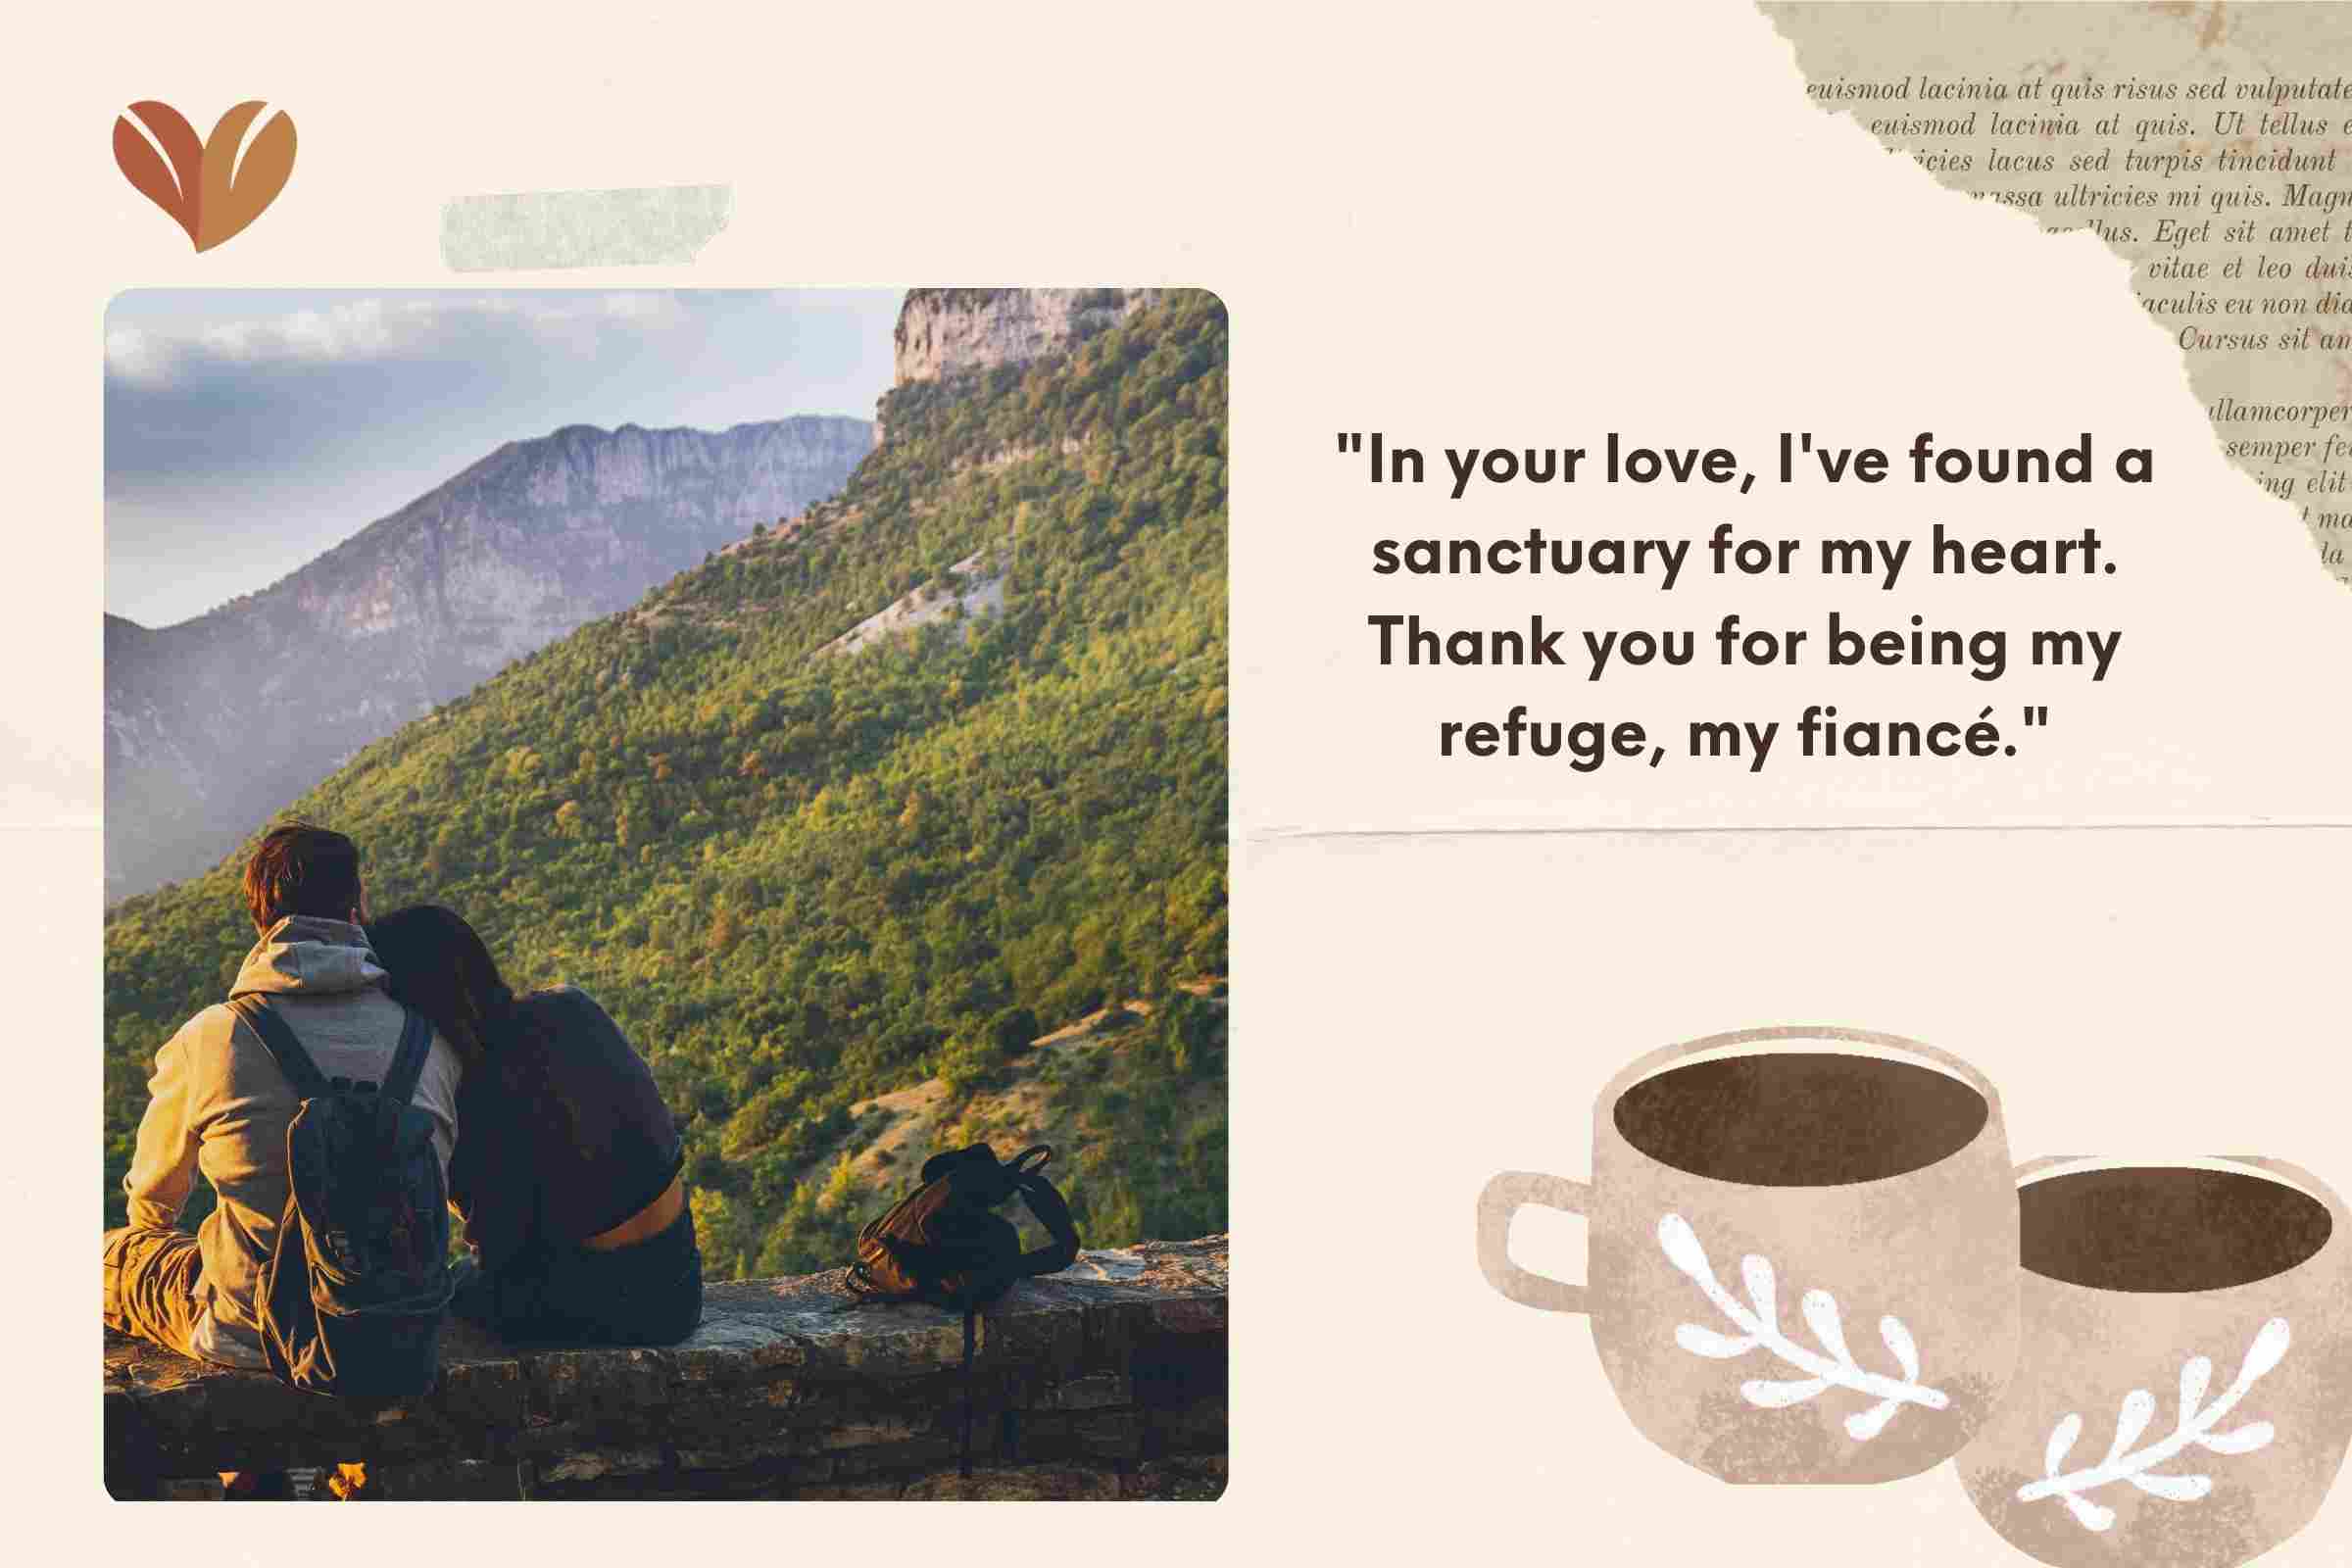 "In your love, I've found a sanctuary for my heart. Thank you for being my refuge, my fiancé."